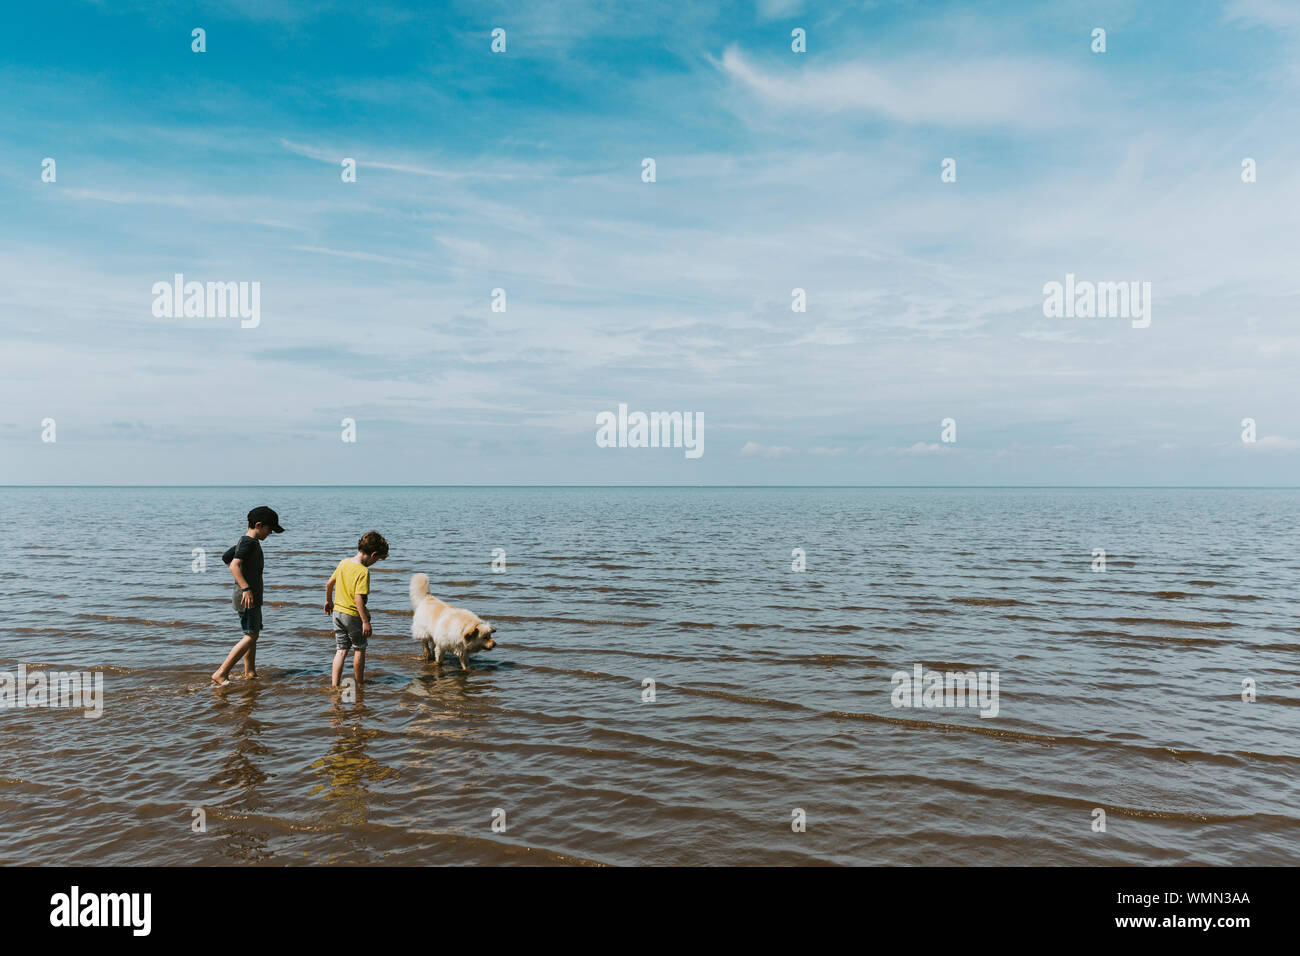 Two brothers and dog paddling in ocean against a cloudy sky Stock Photo